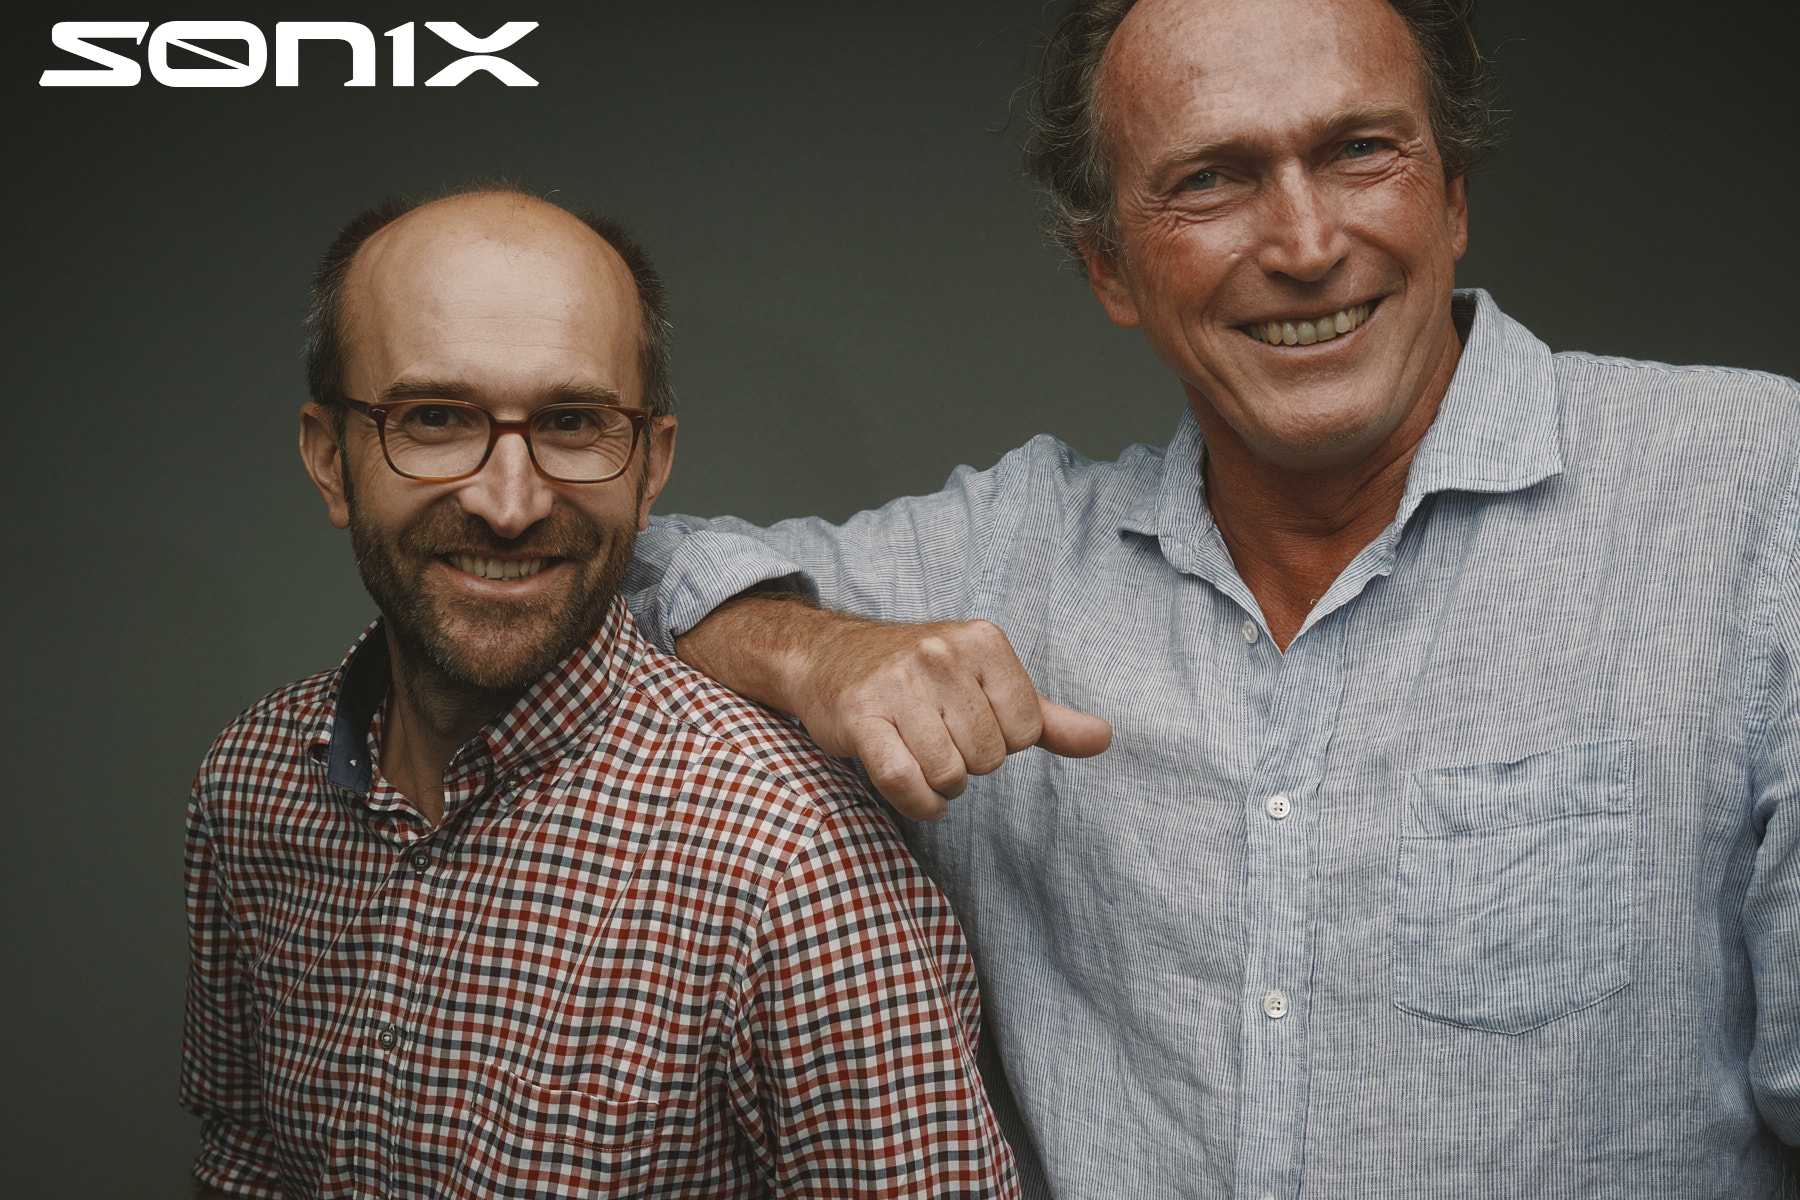 SONIX's co-founders pose together for a photo.